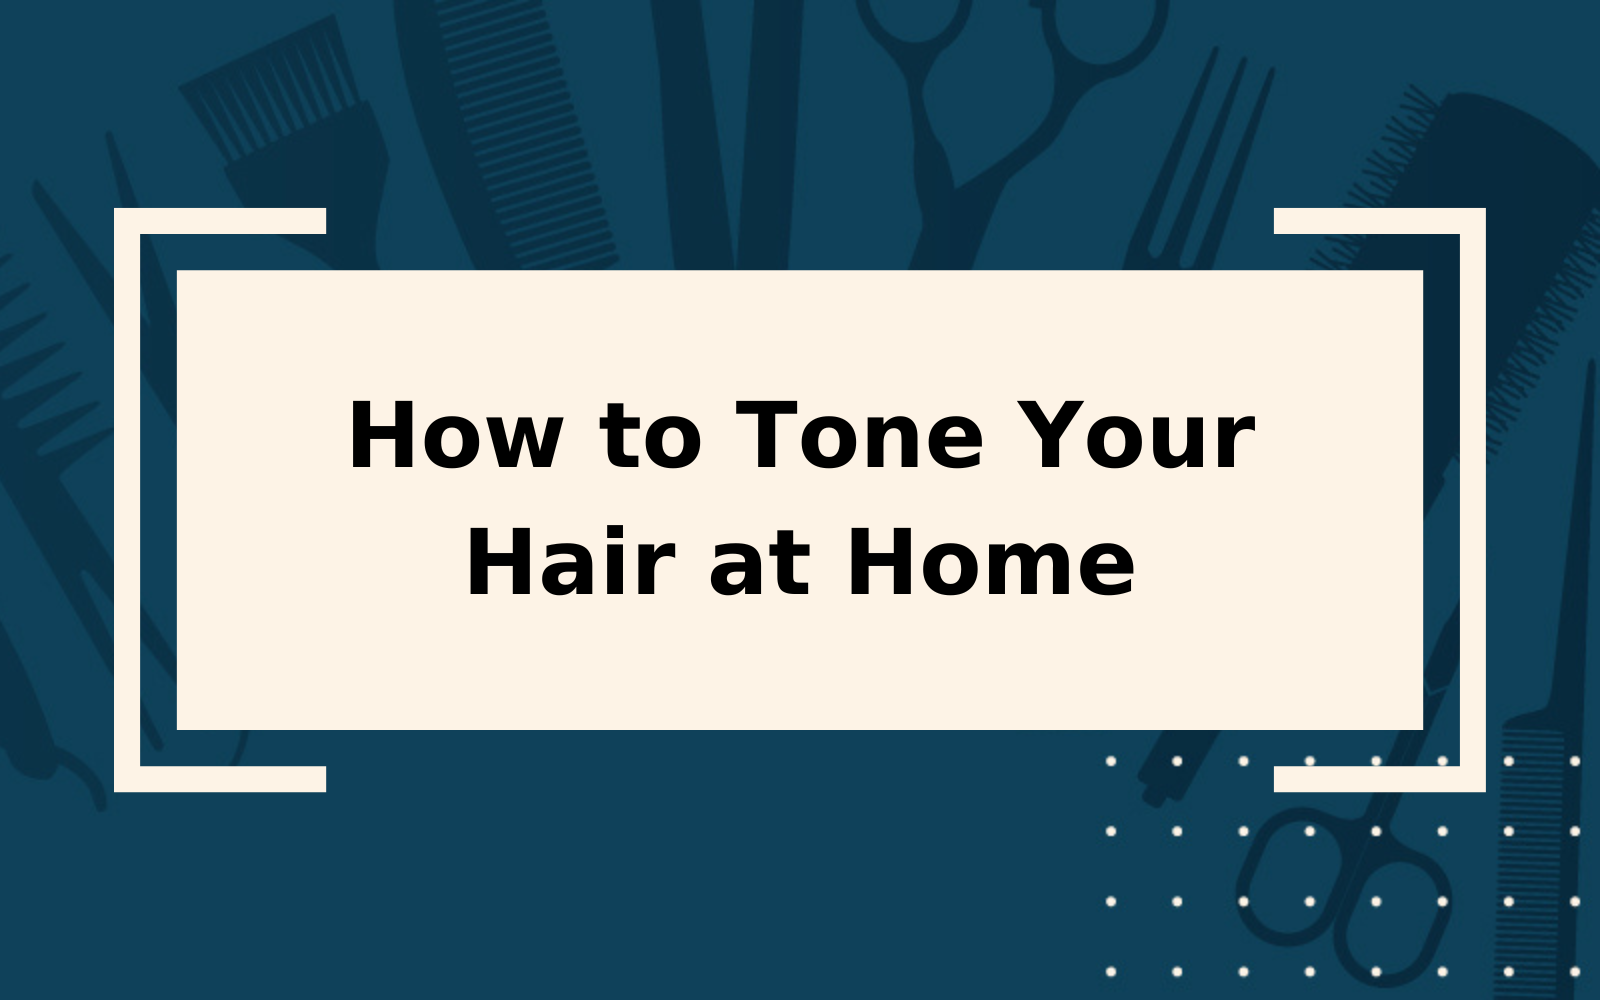 How to Tone Hair | Step-by-Step Guide & Things to Consider